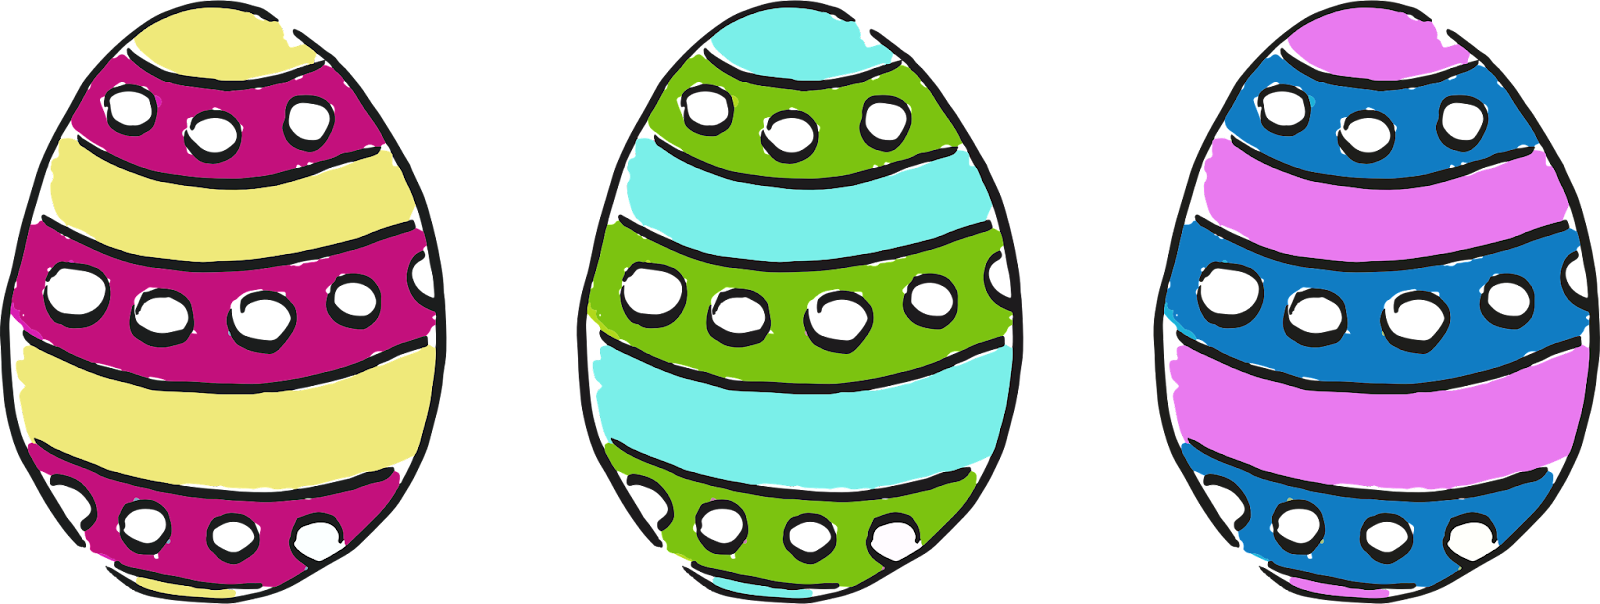 image of three colorful decorated eggs